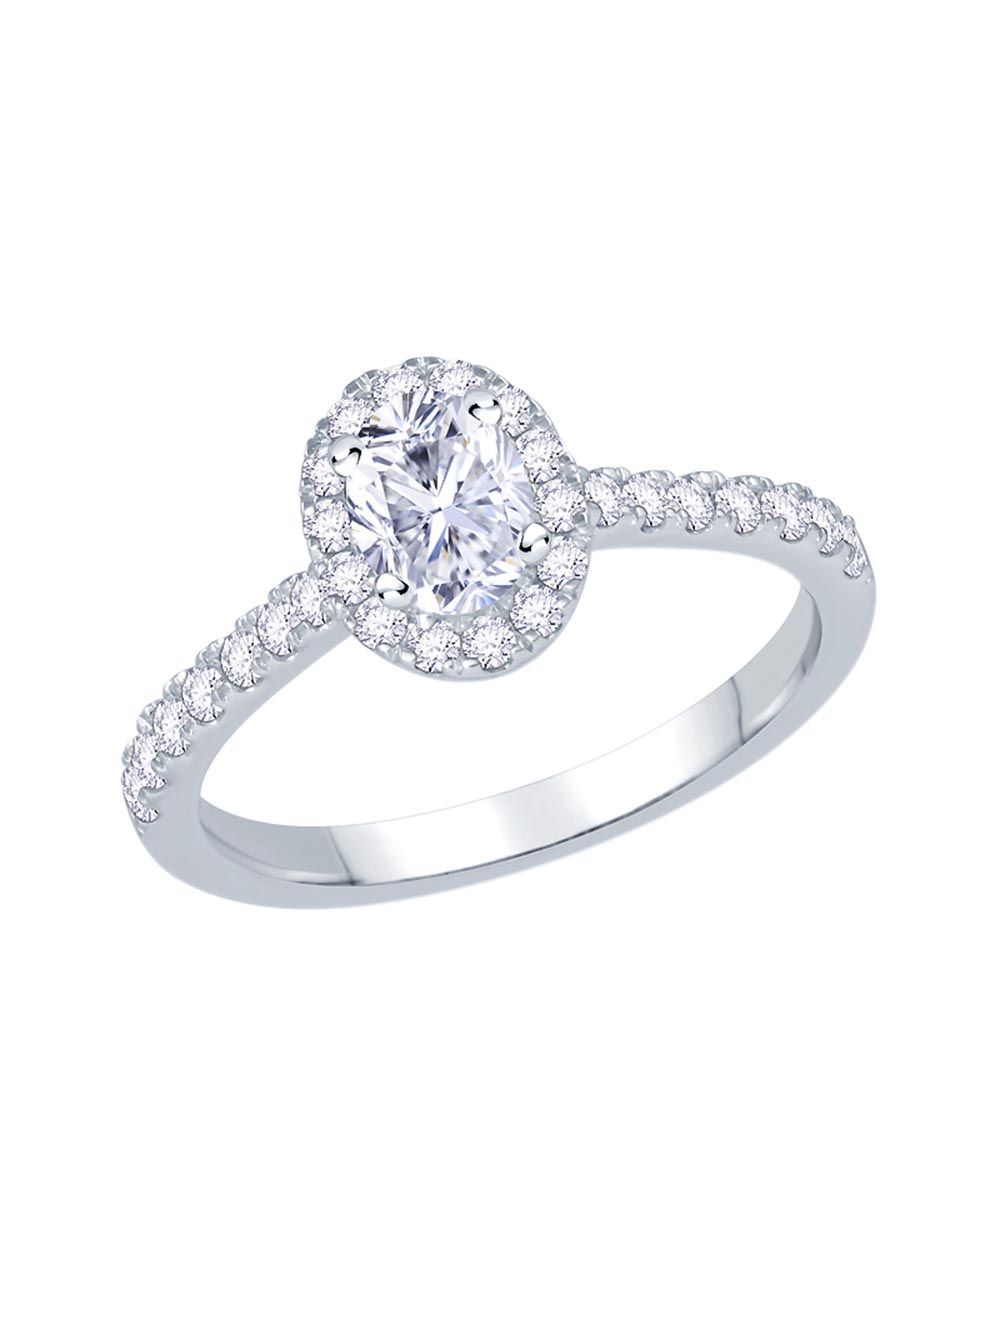 18ct White Gold Oval Shaped Engagement Ring Regarding Oval Shaped Engagement Rings (View 25 of 25)